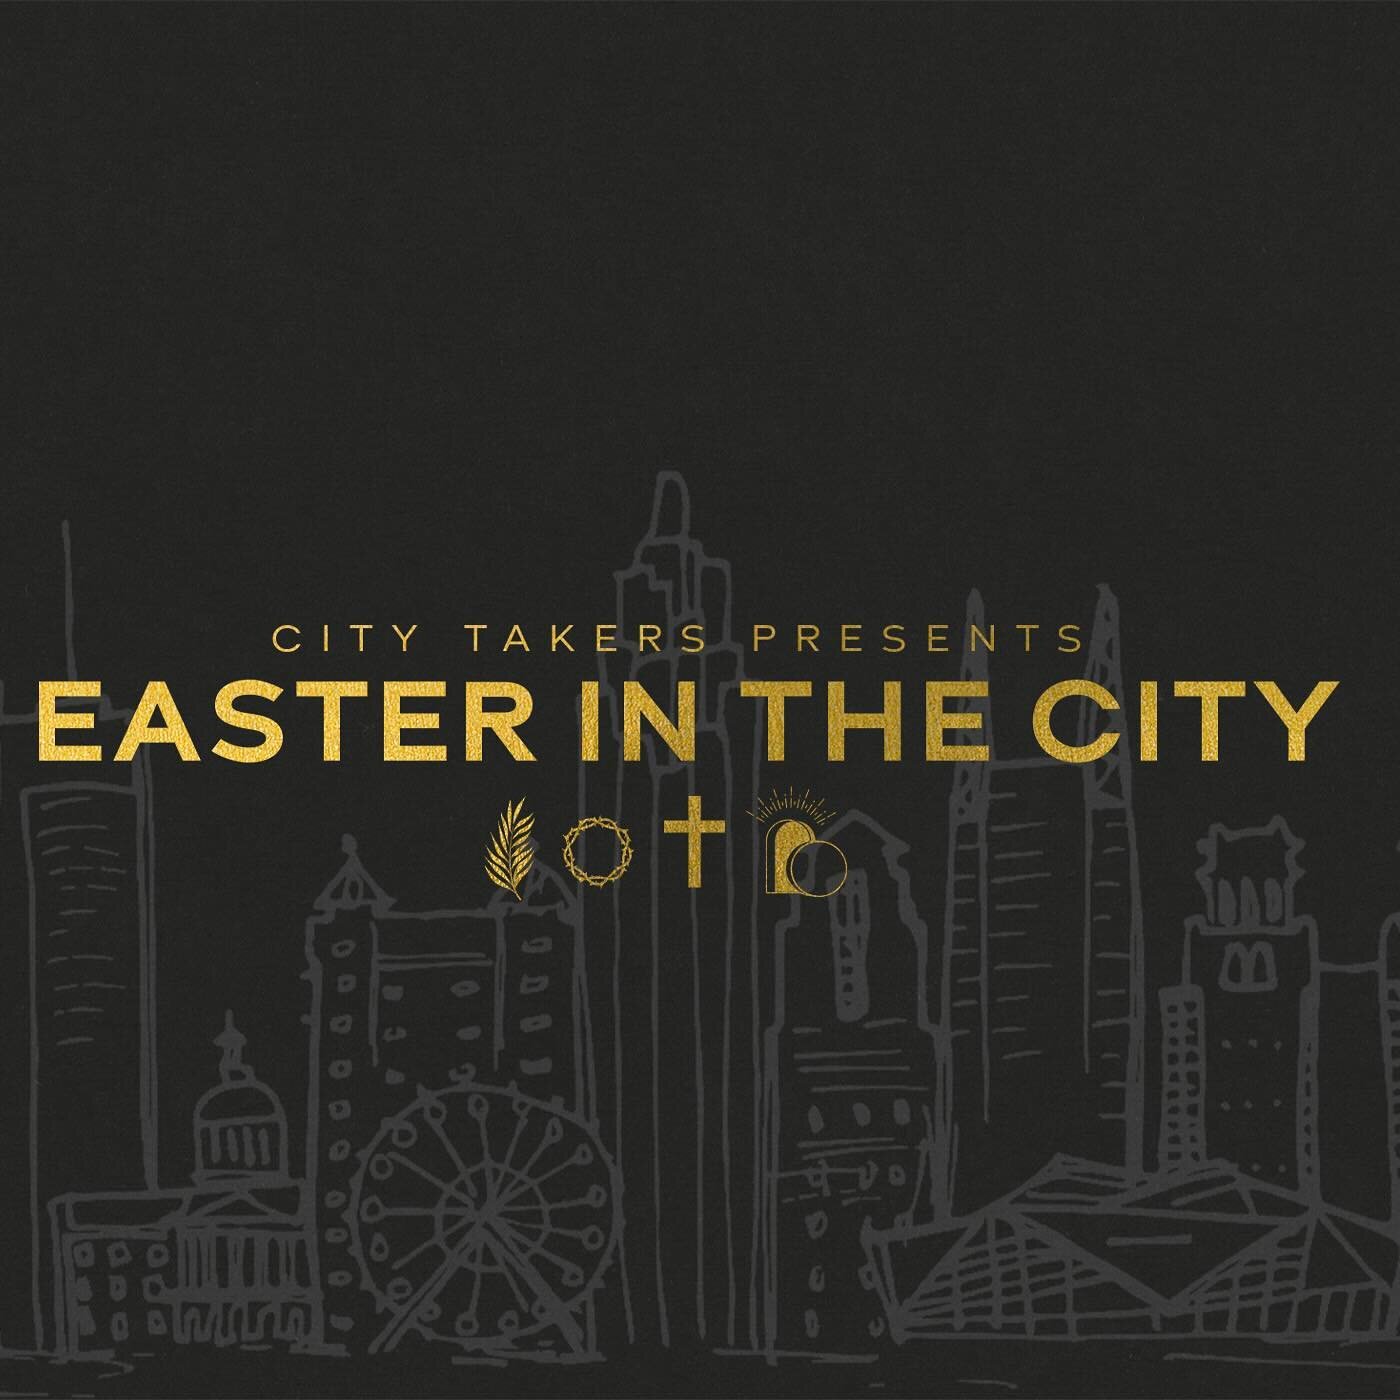 Join us as we celebrate the resurrection of Jesus!

✨EASTER IN THE CITY✨

- City wide PRAYER &amp; WORSHIP night 
  Good Friday 3/29 @ 7p

- City SERVE opportunity 
  Saturday 3/30 @ 10a

- City RESURRECTION CELEBRATION 
  Sunday 3/31 @ 10:45a
  Egg 